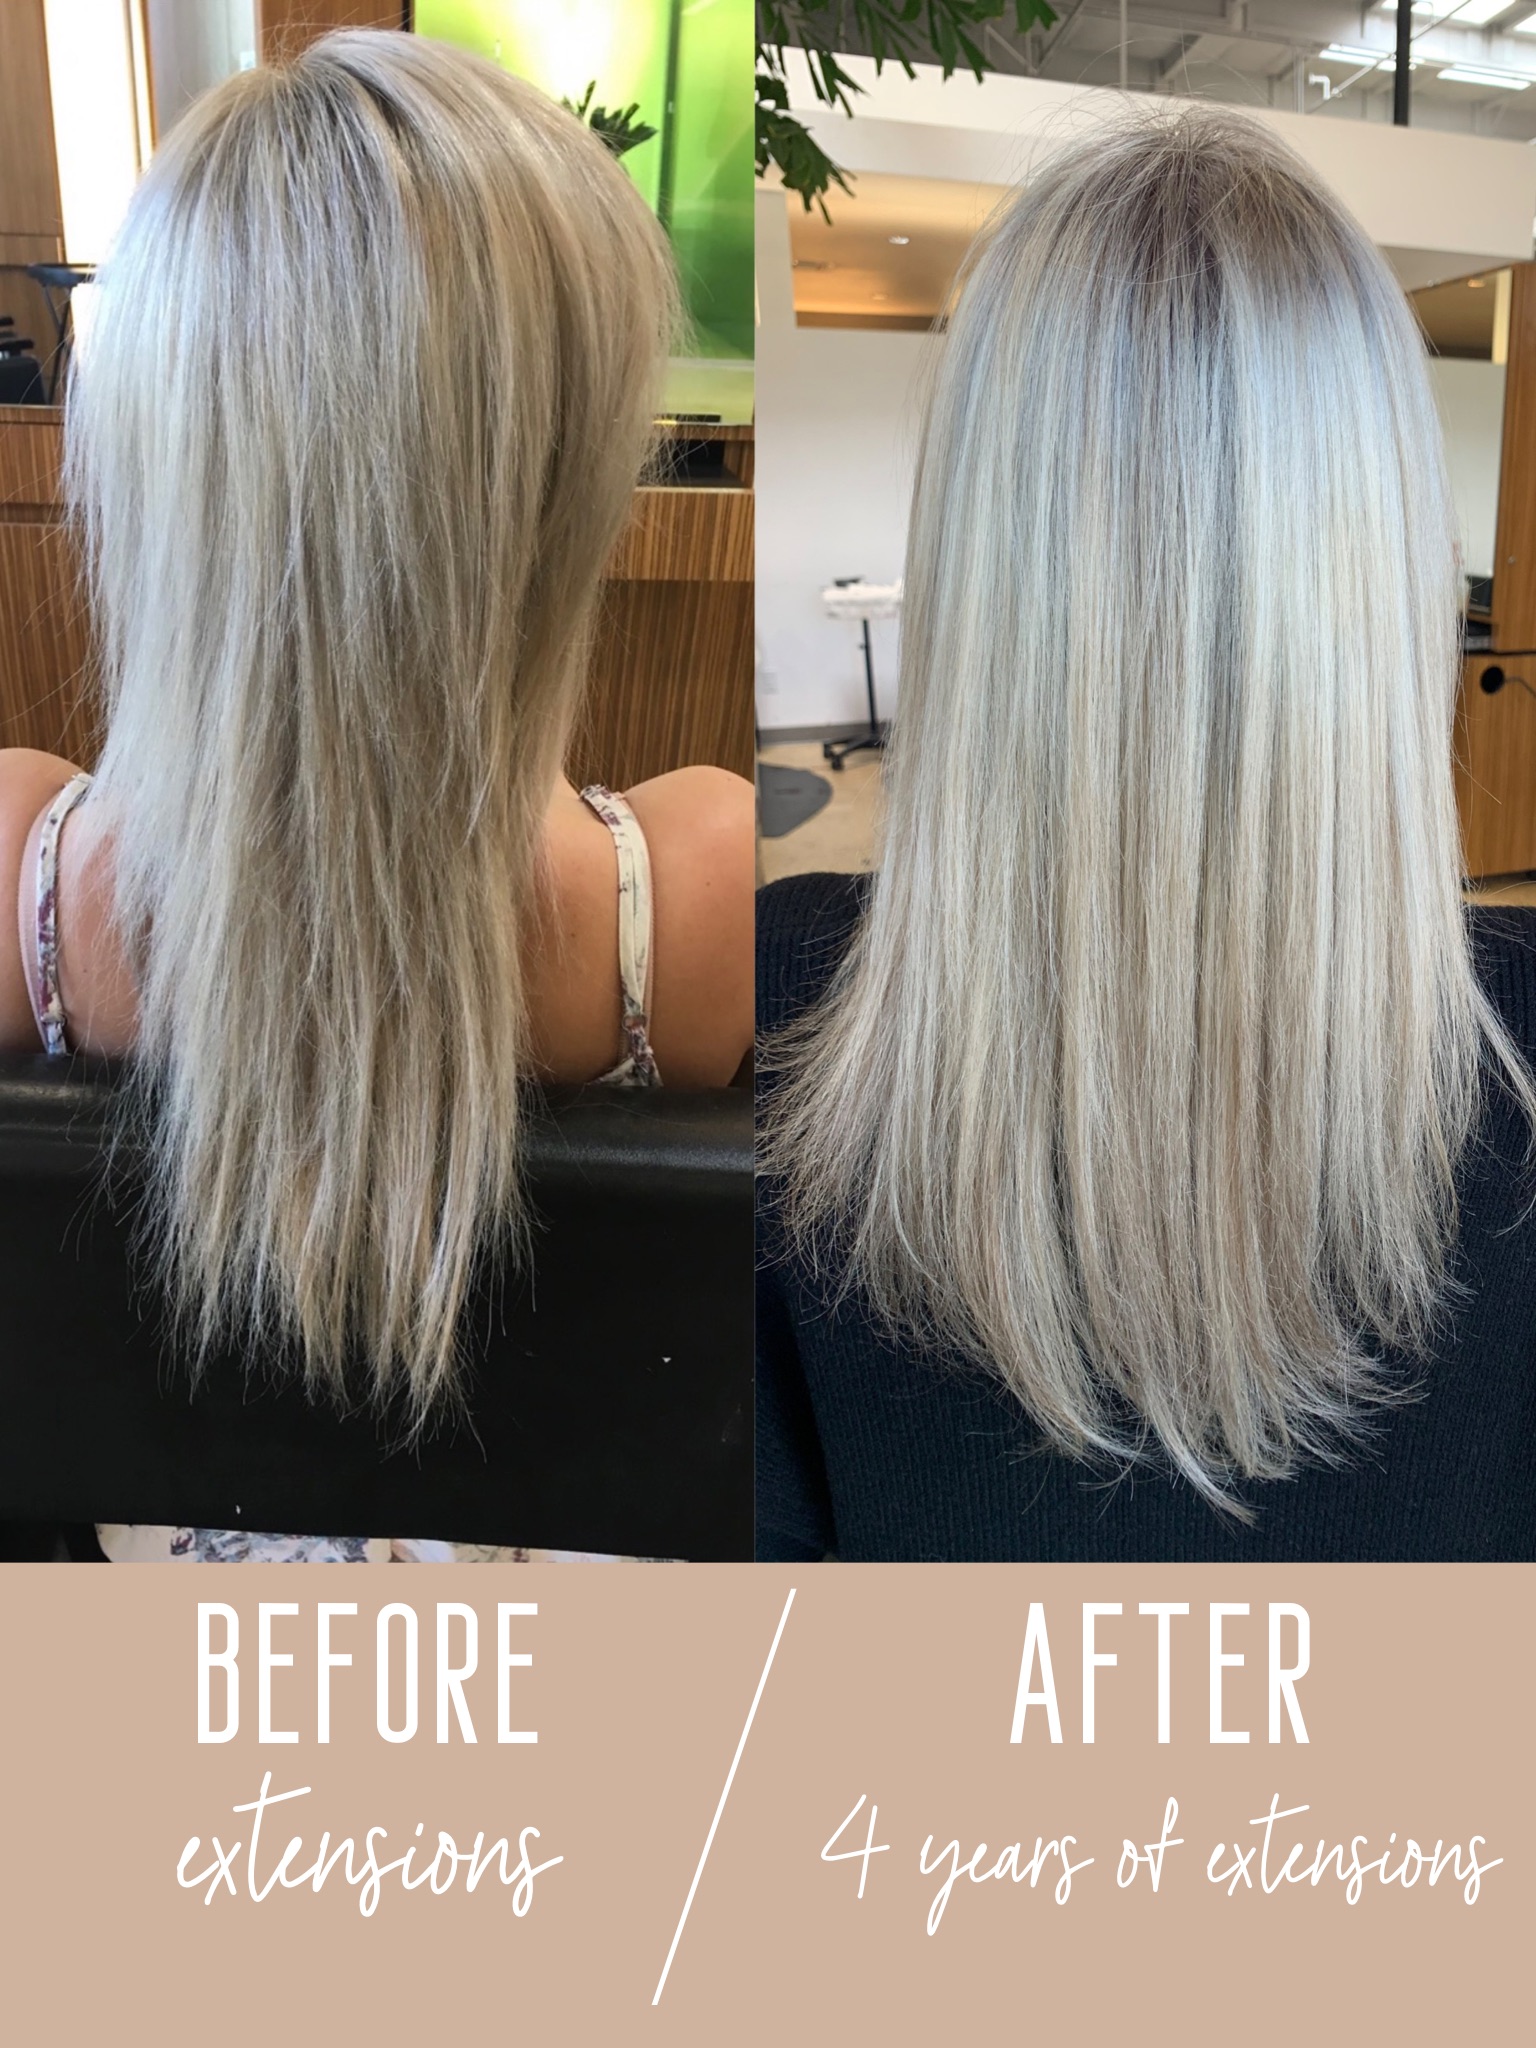 Myths About Hair Extensions | Why hair extensions actually make your hair healthier | Blondie in the City by Hayley Larue